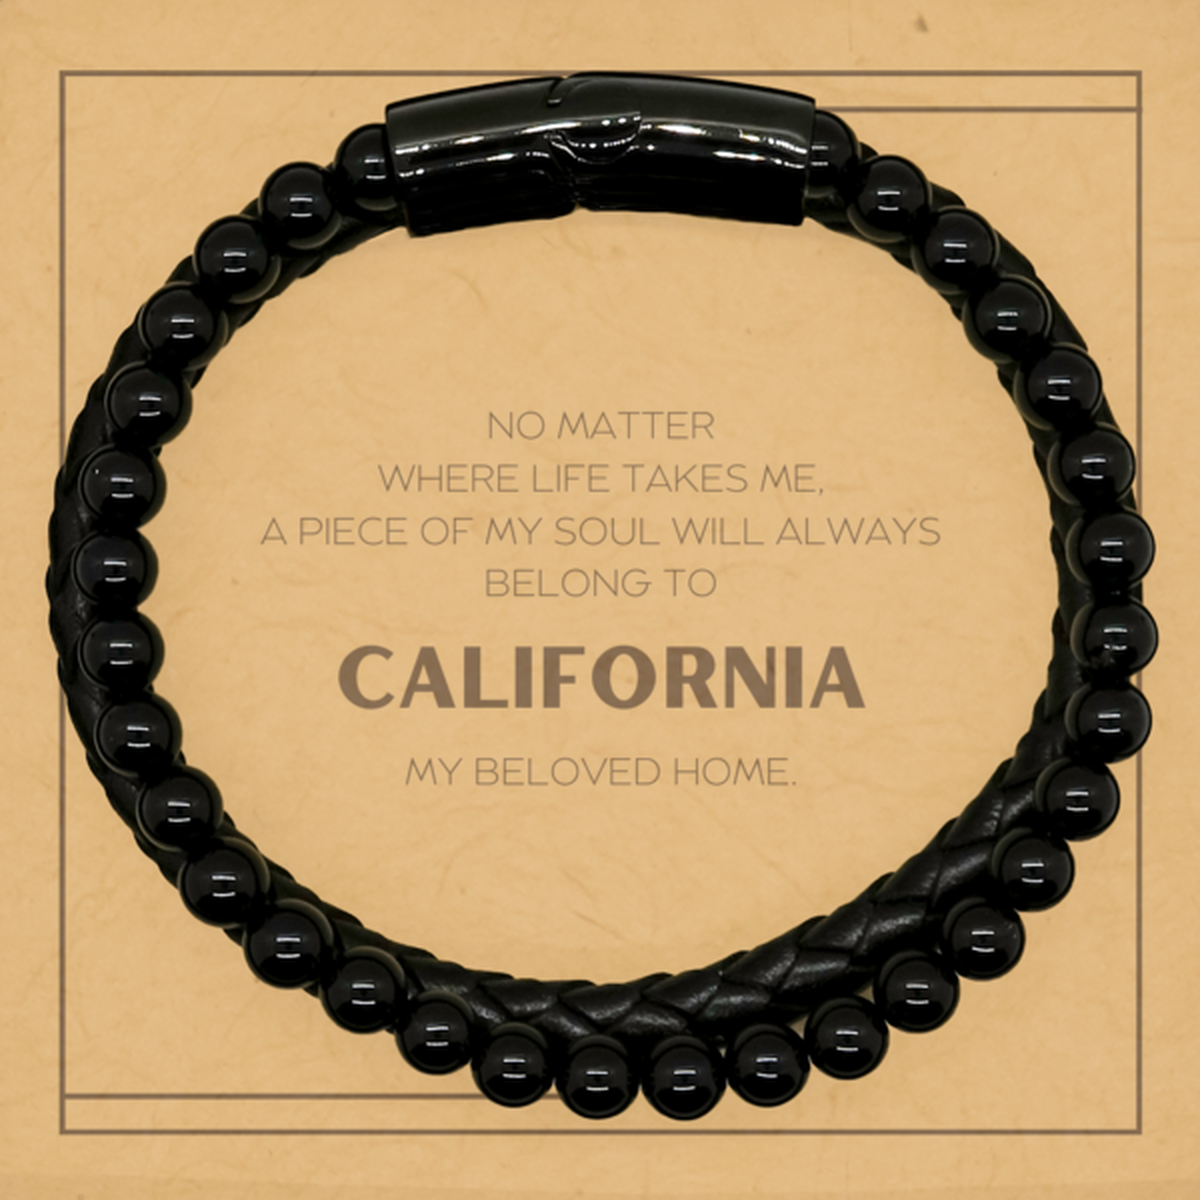 Love California State Gifts, My soul will always belong to California, Proud Stone Leather Bracelets, Birthday Unique Gifts For California Men, Women, Friends